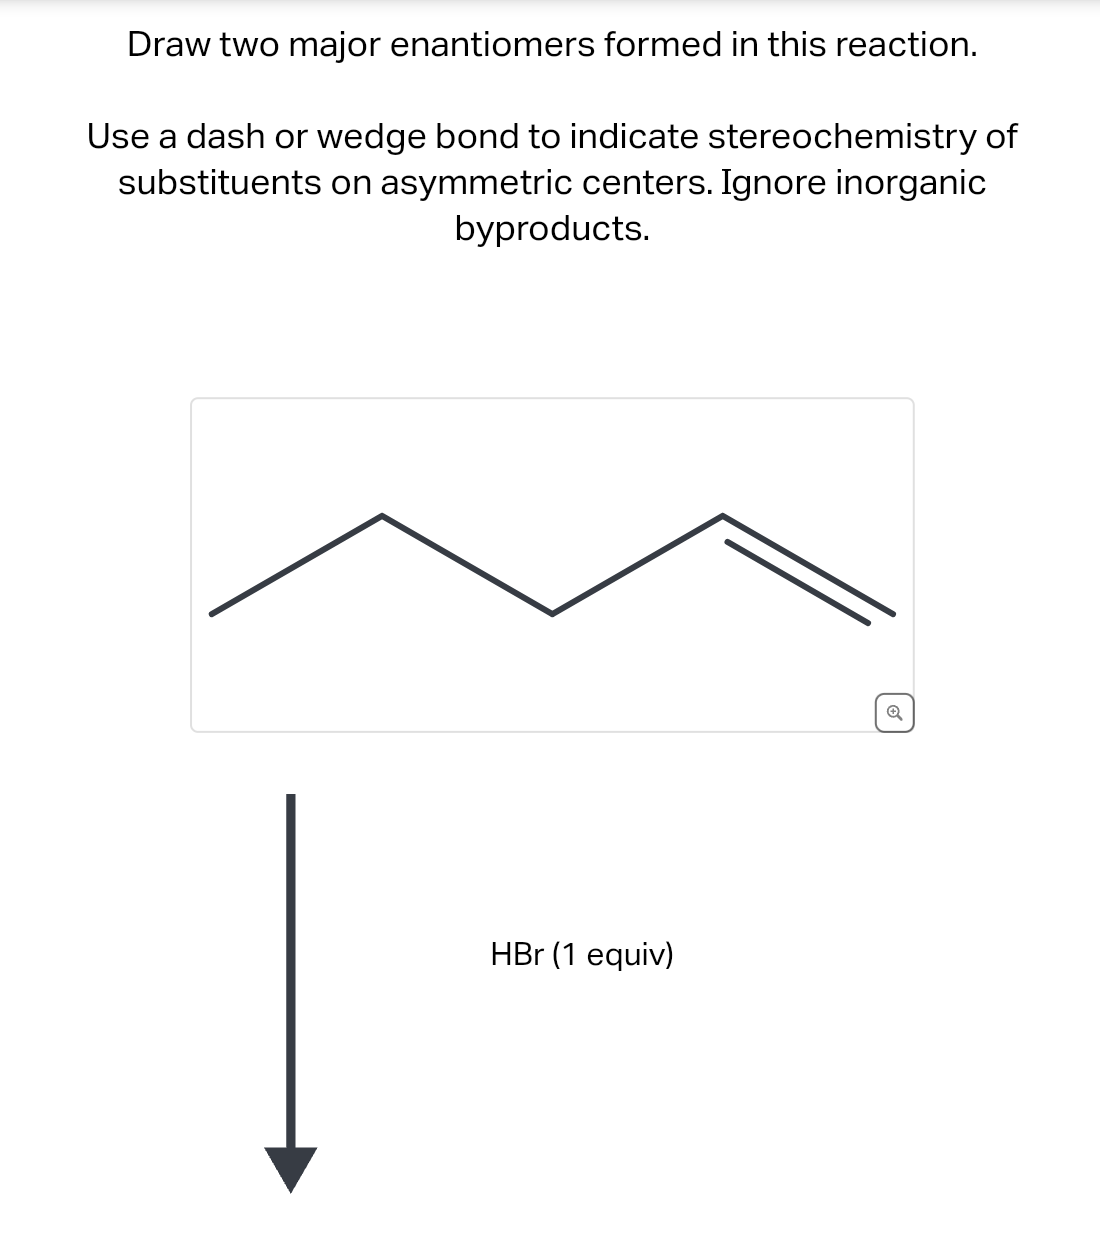 Draw two major enantiomers formed in this reaction.
Use a dash or wedge bond to indicate stereochemistry of
substituents on asymmetric centers. Ignore inorganic
byproducts.
HBr (1 equiv)
Q